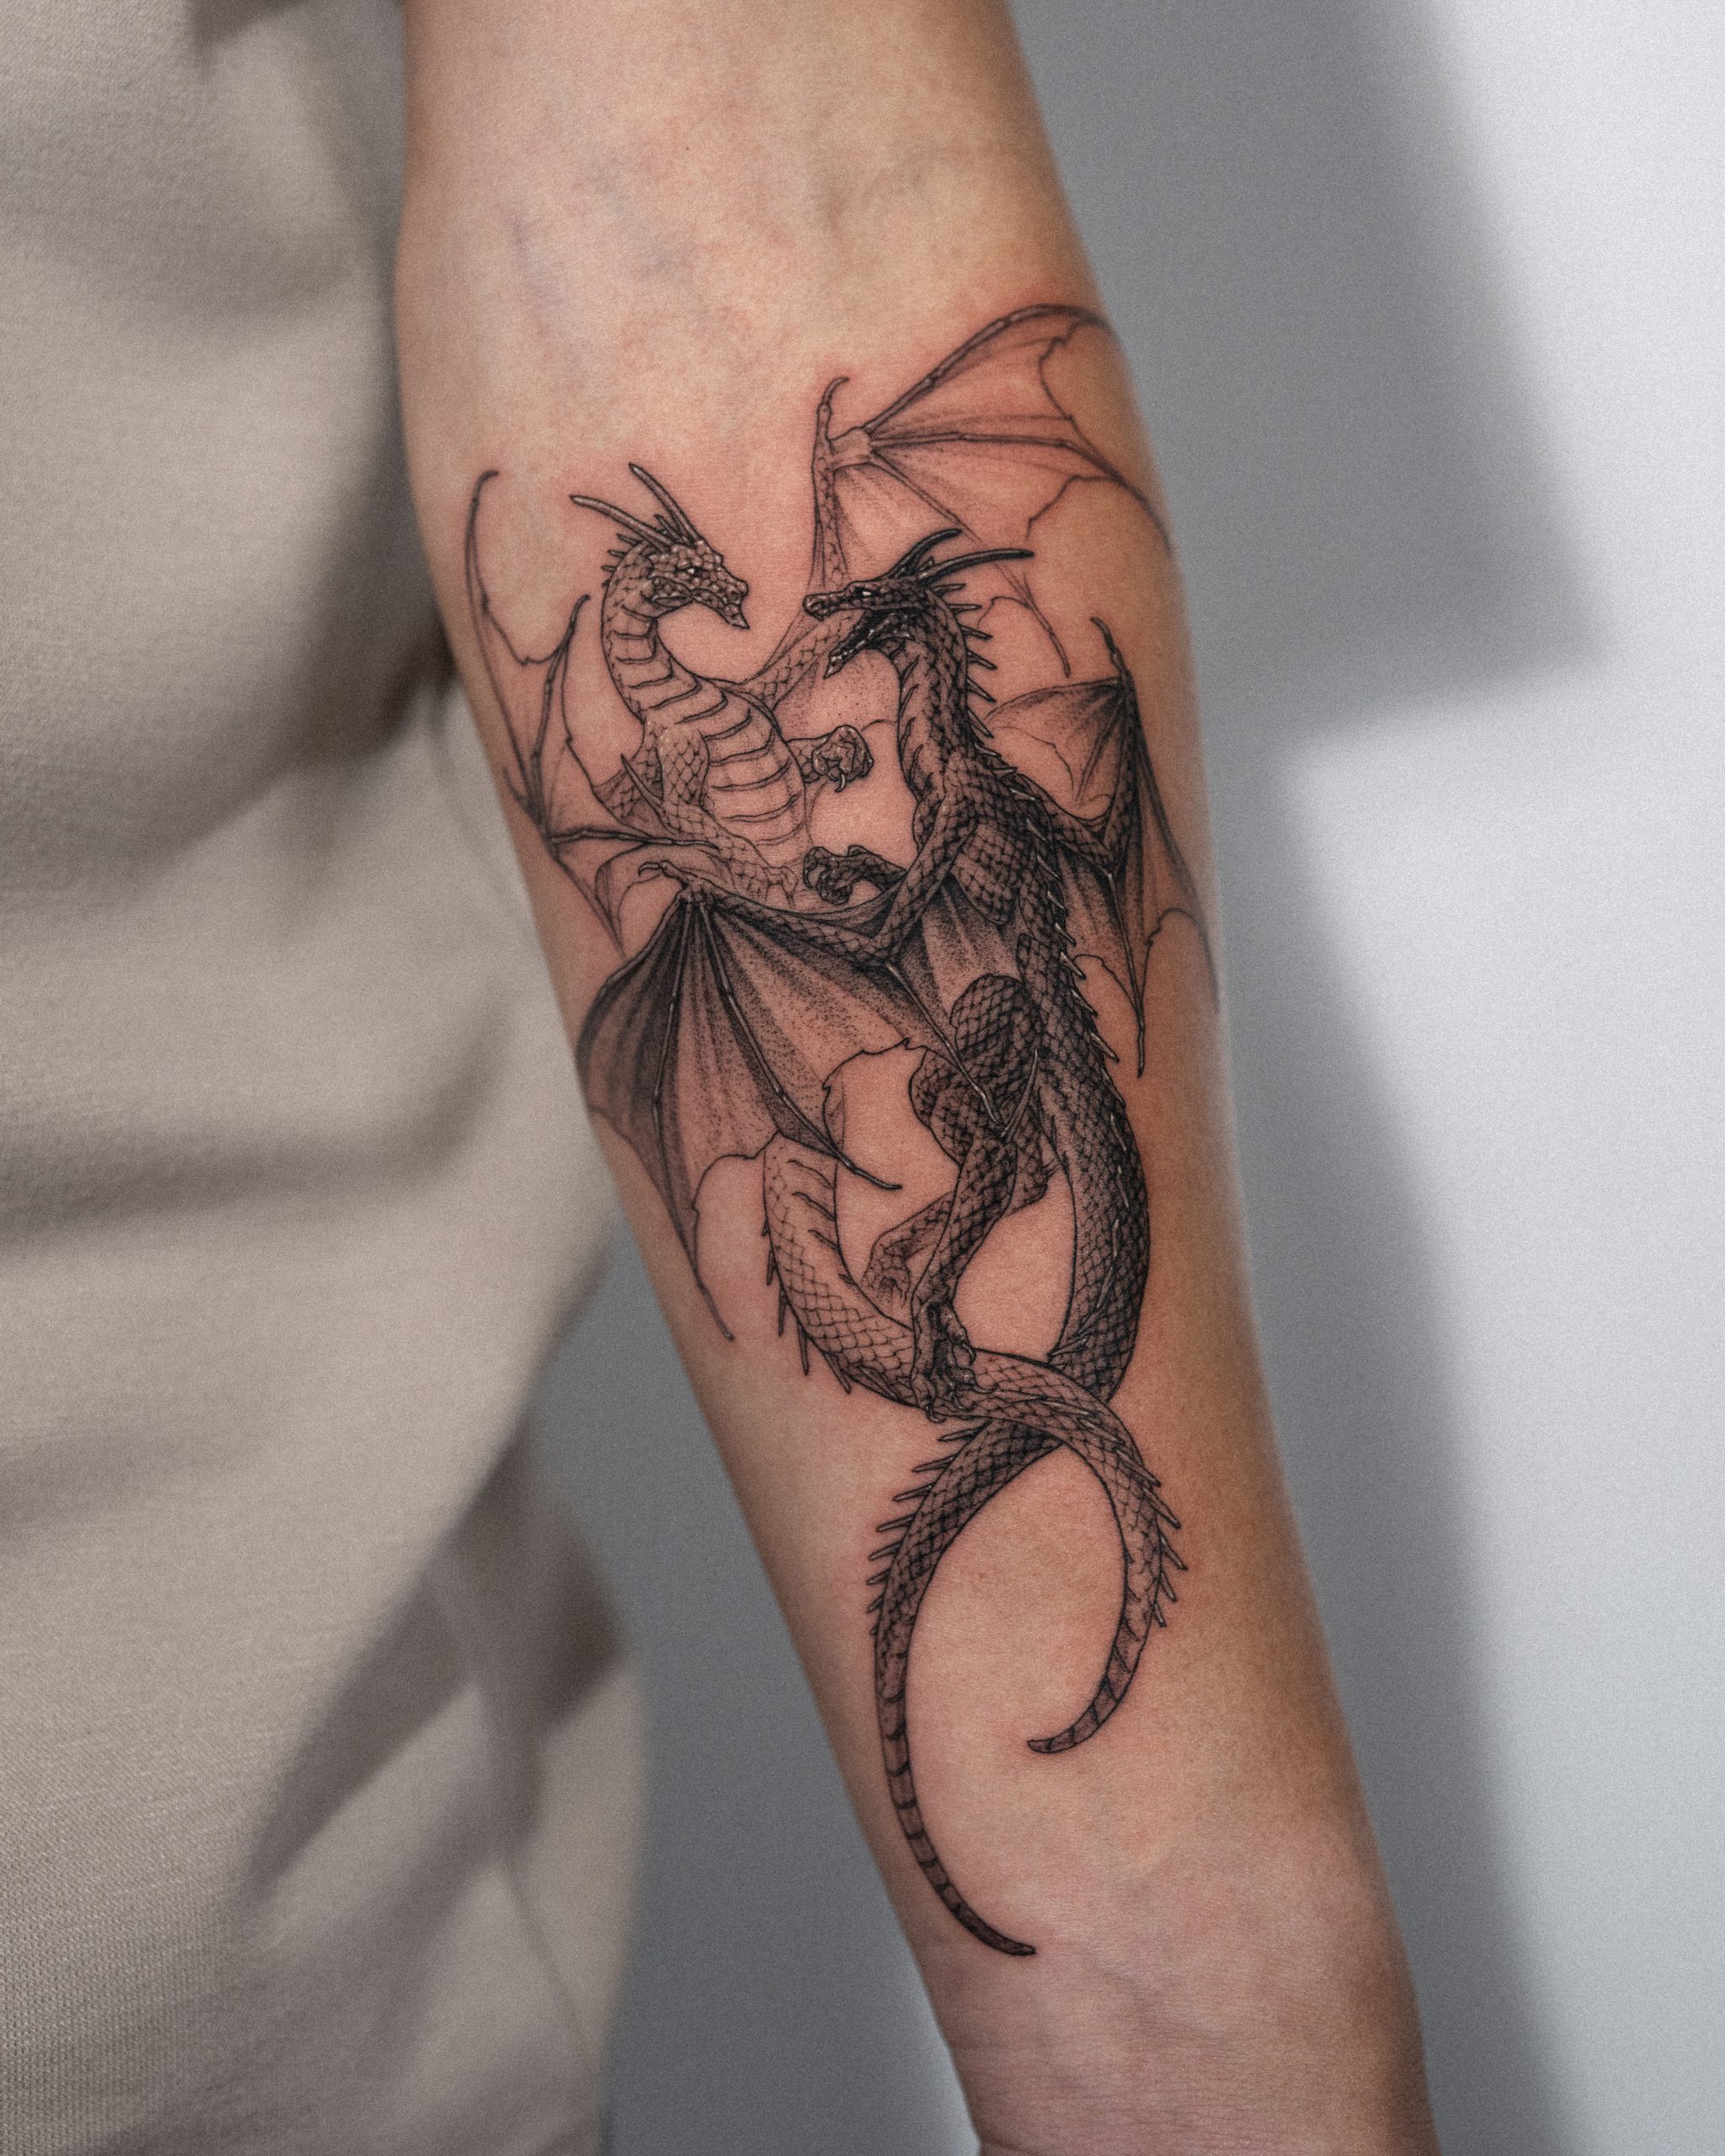 6 Stunning Mythical Creature Tattoo Ideas  Their Meanings